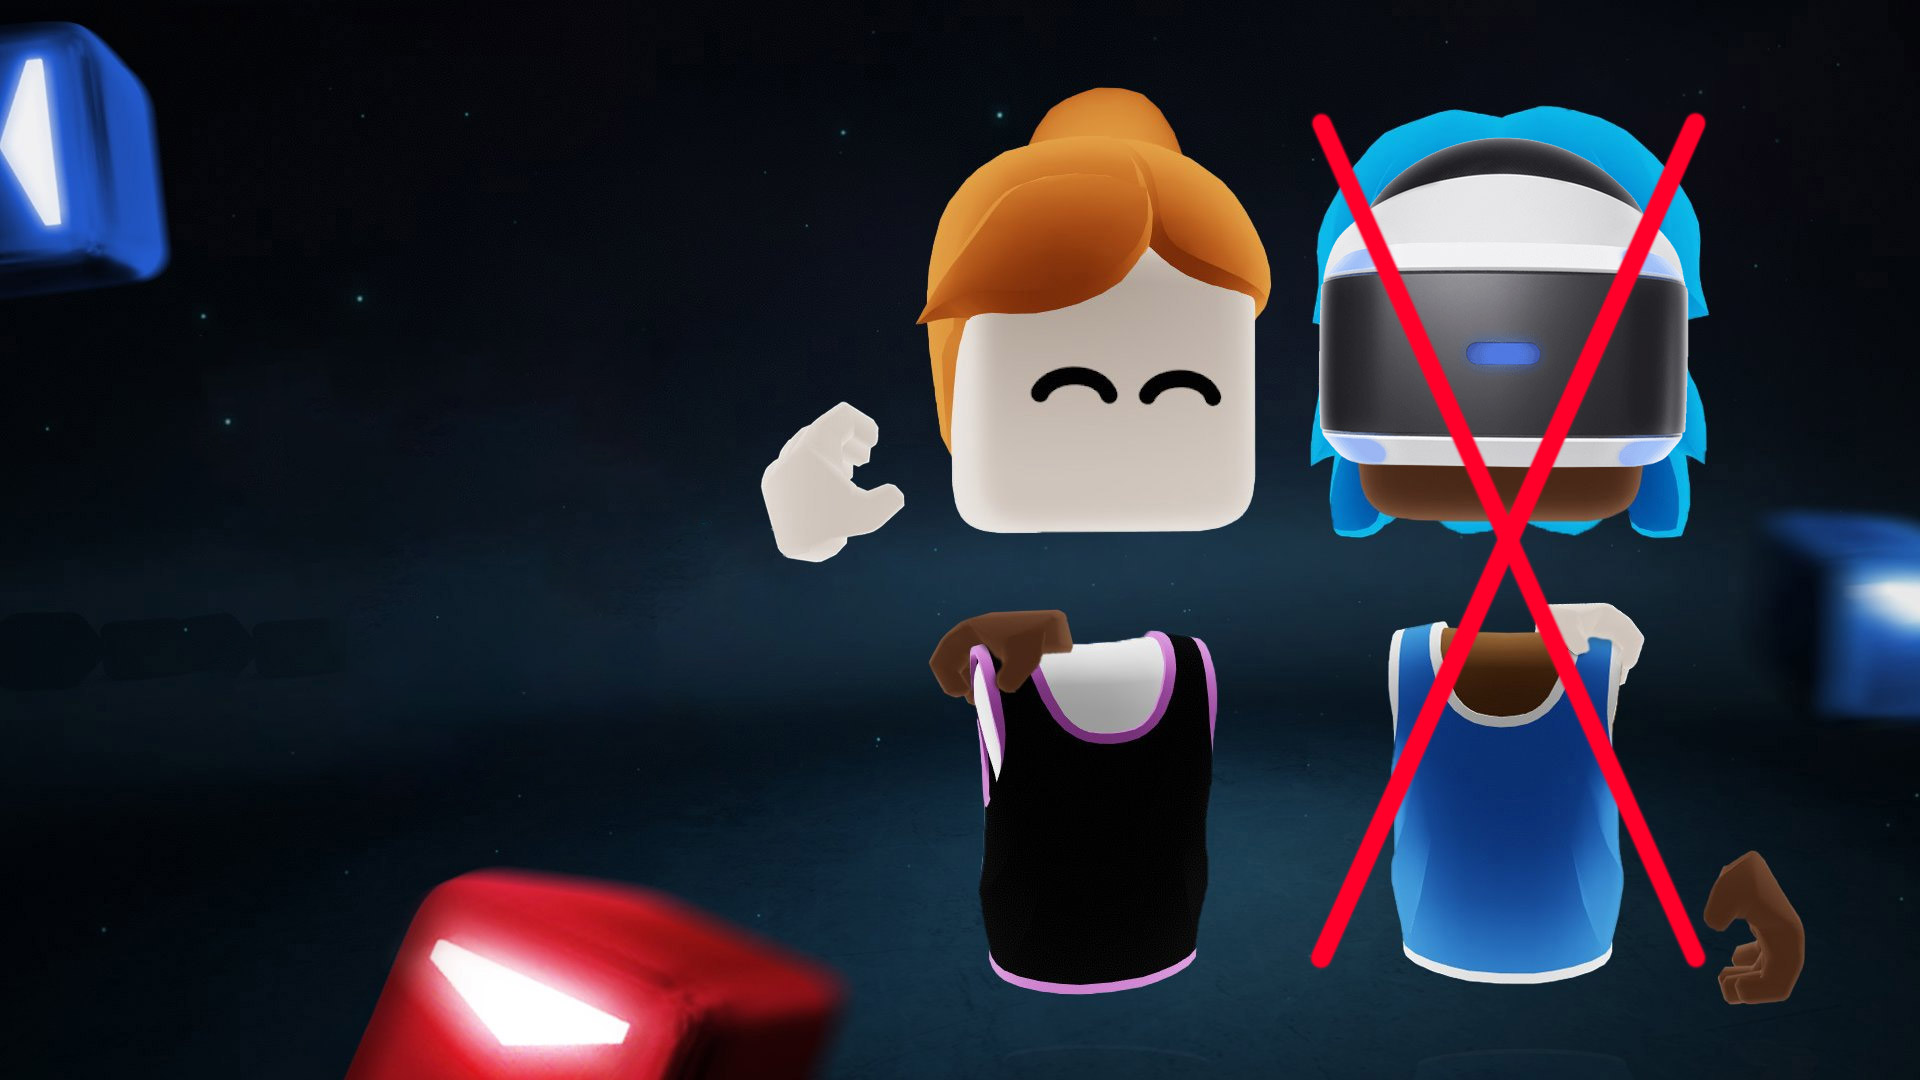 HOW TO MAKE YOUR OWN ROBLOX LEGO STAR WARS PROFILE PICTURE!